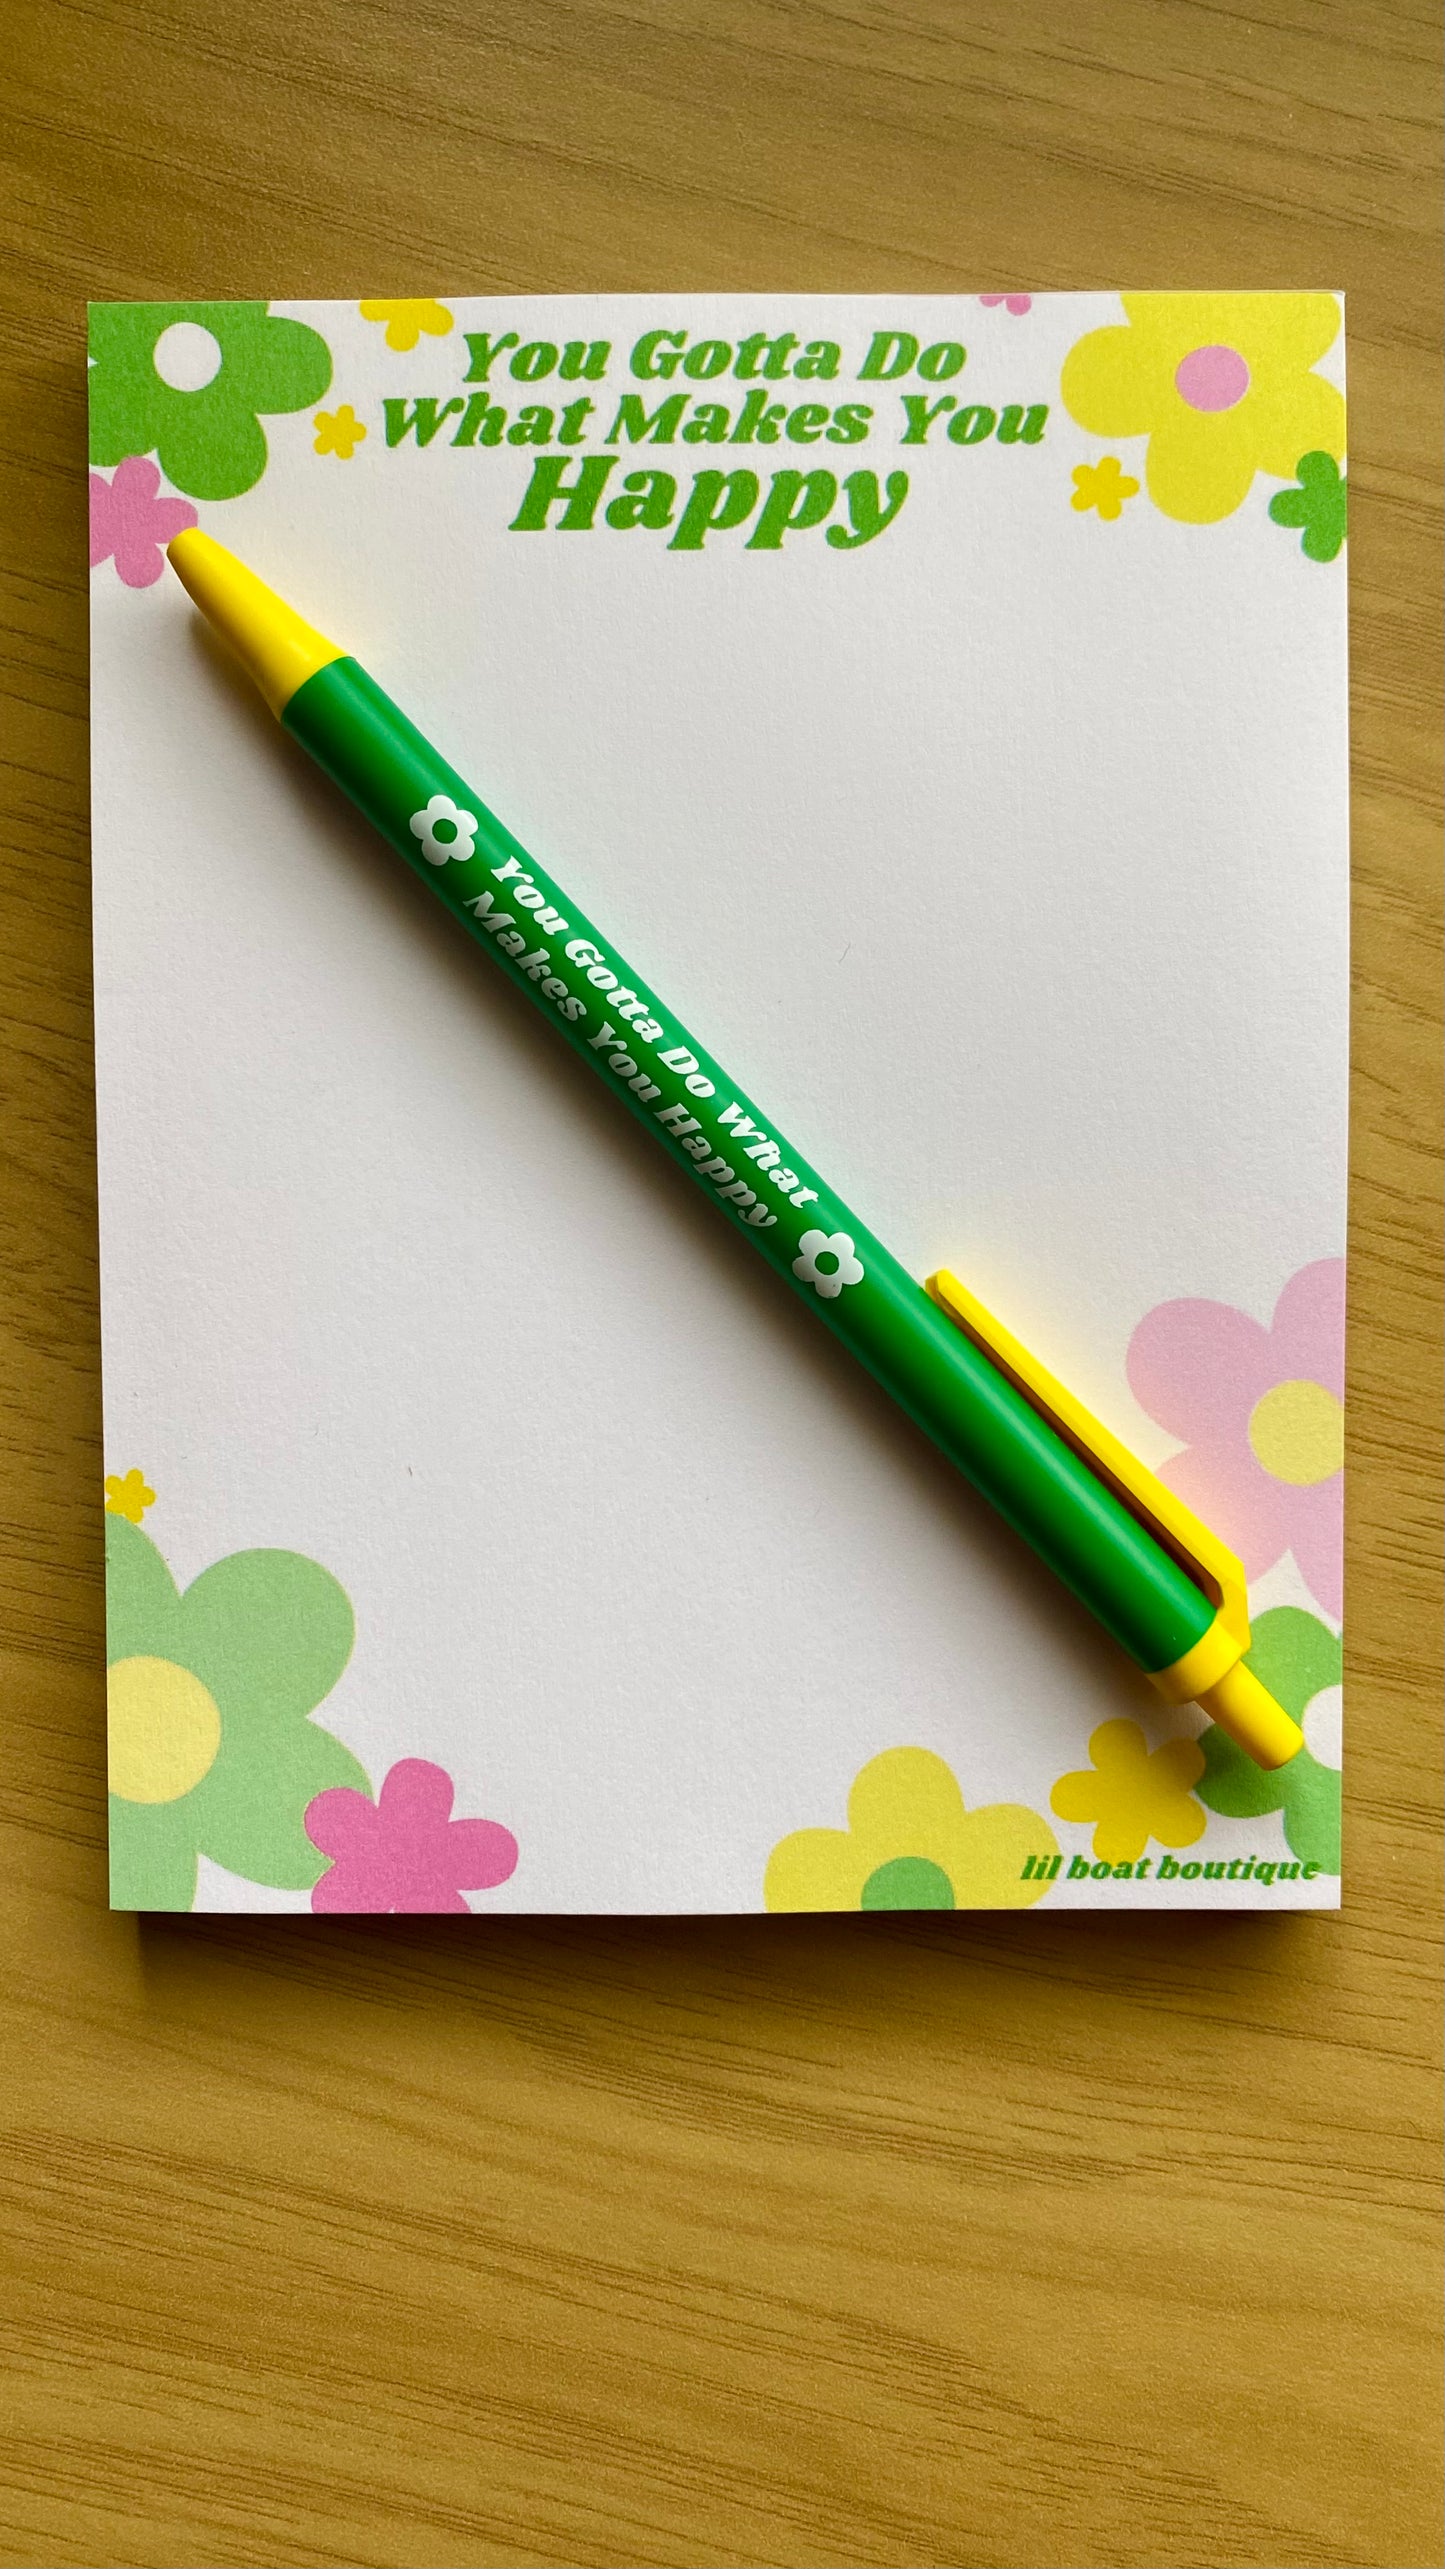 You Gotta Do What Makes You Happy - Pen and Notepad Set